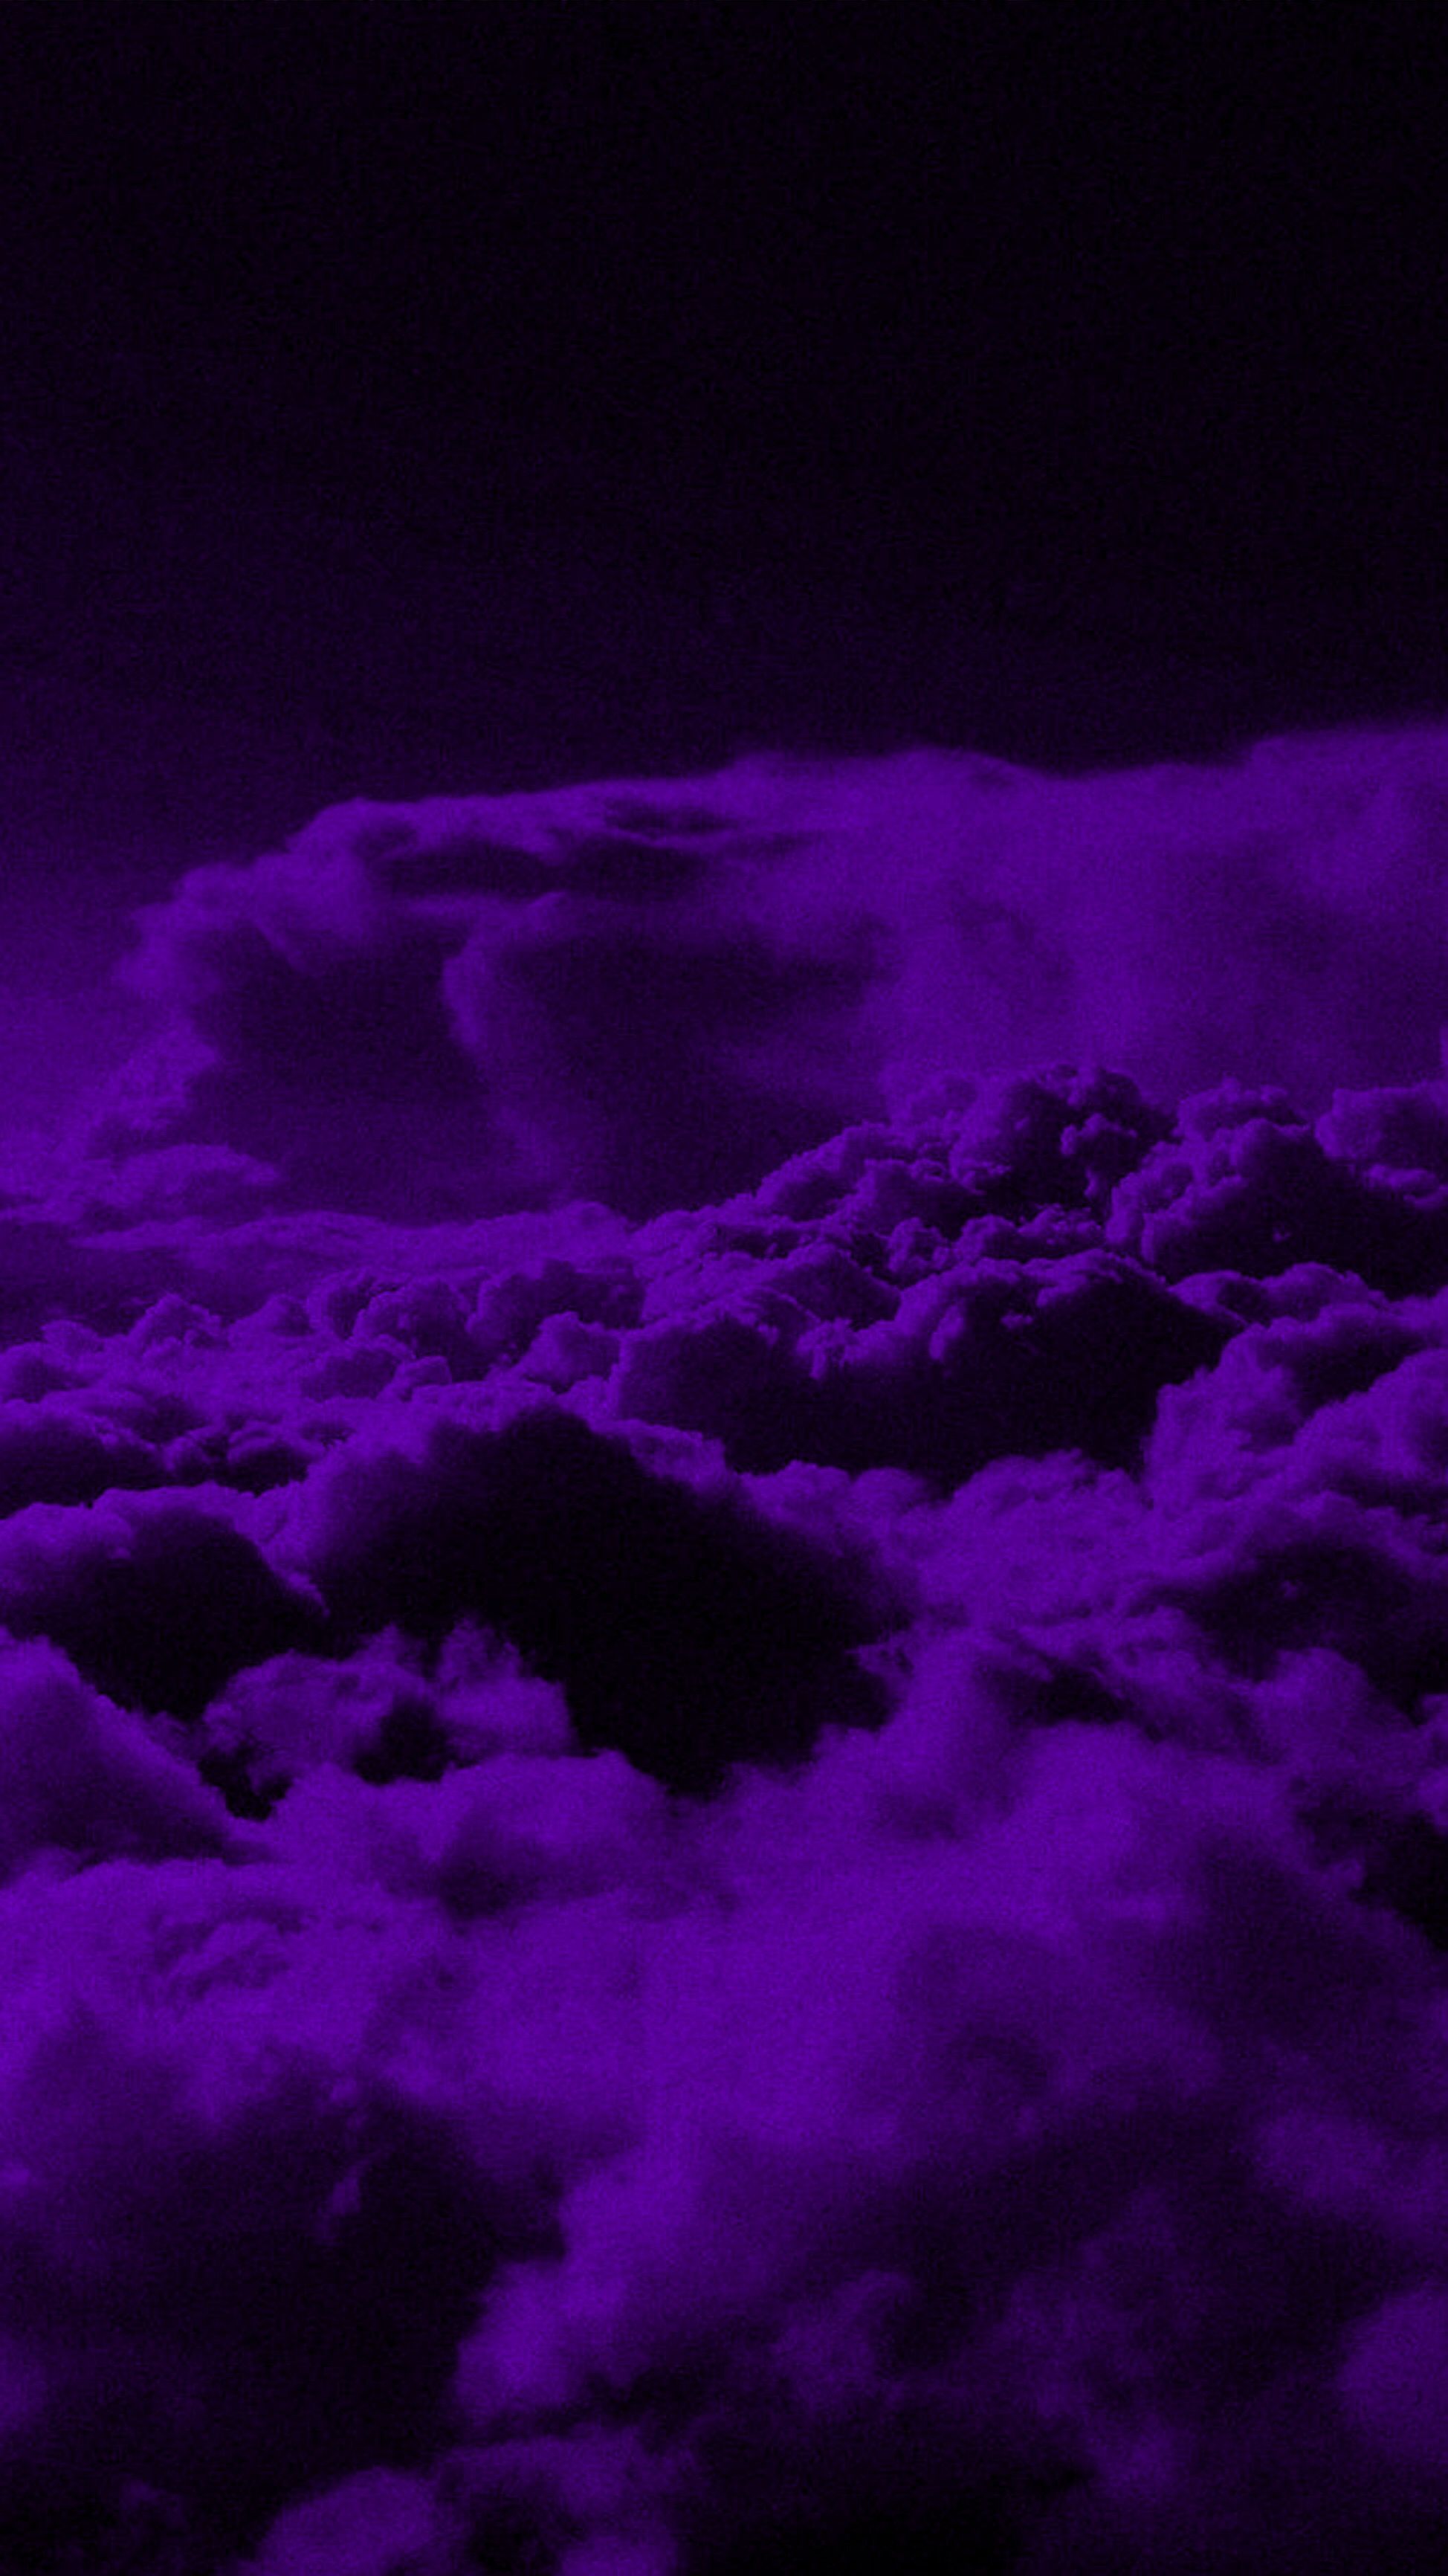 A purple sky with clouds and an airplane - Dark purple